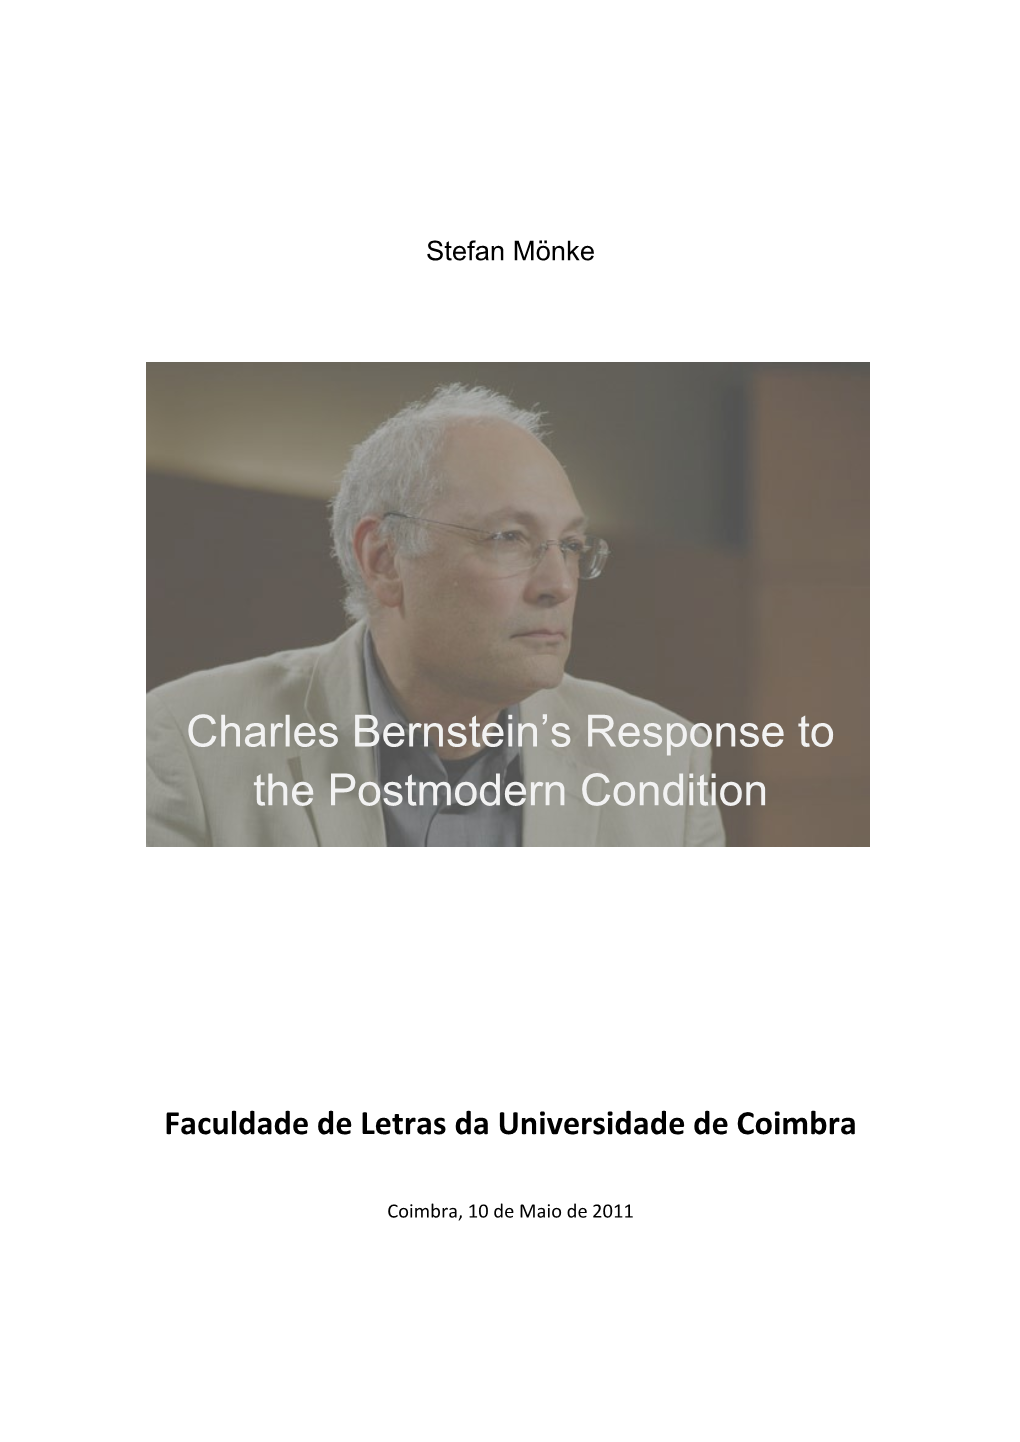 Charles Bernstein's Response to the Postmodern Condition